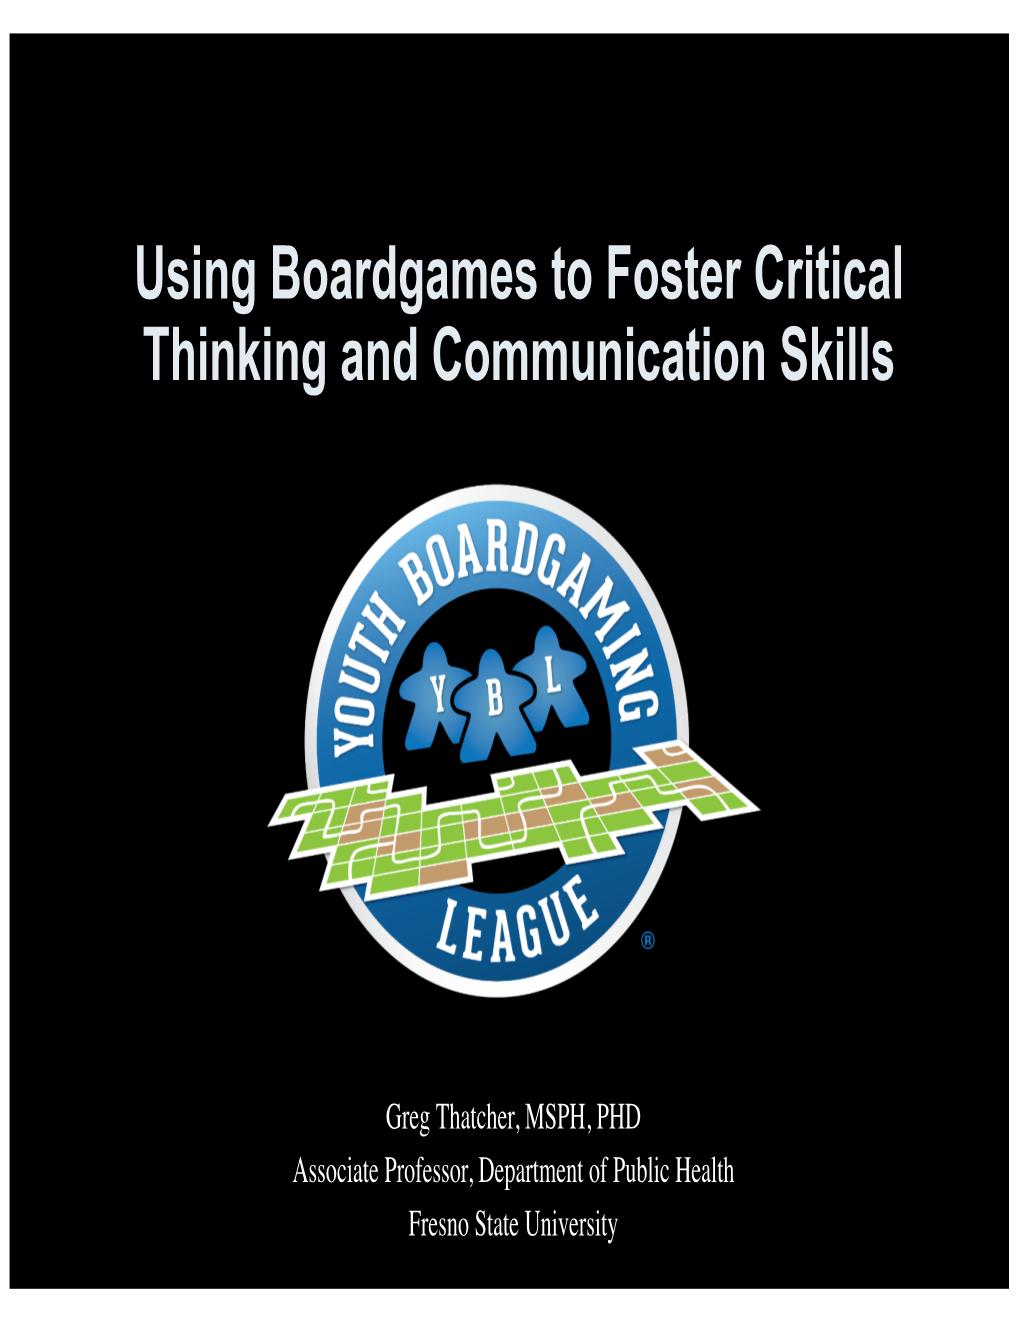 Using Boardgames to Foster Critical Thinking and Communication Skills